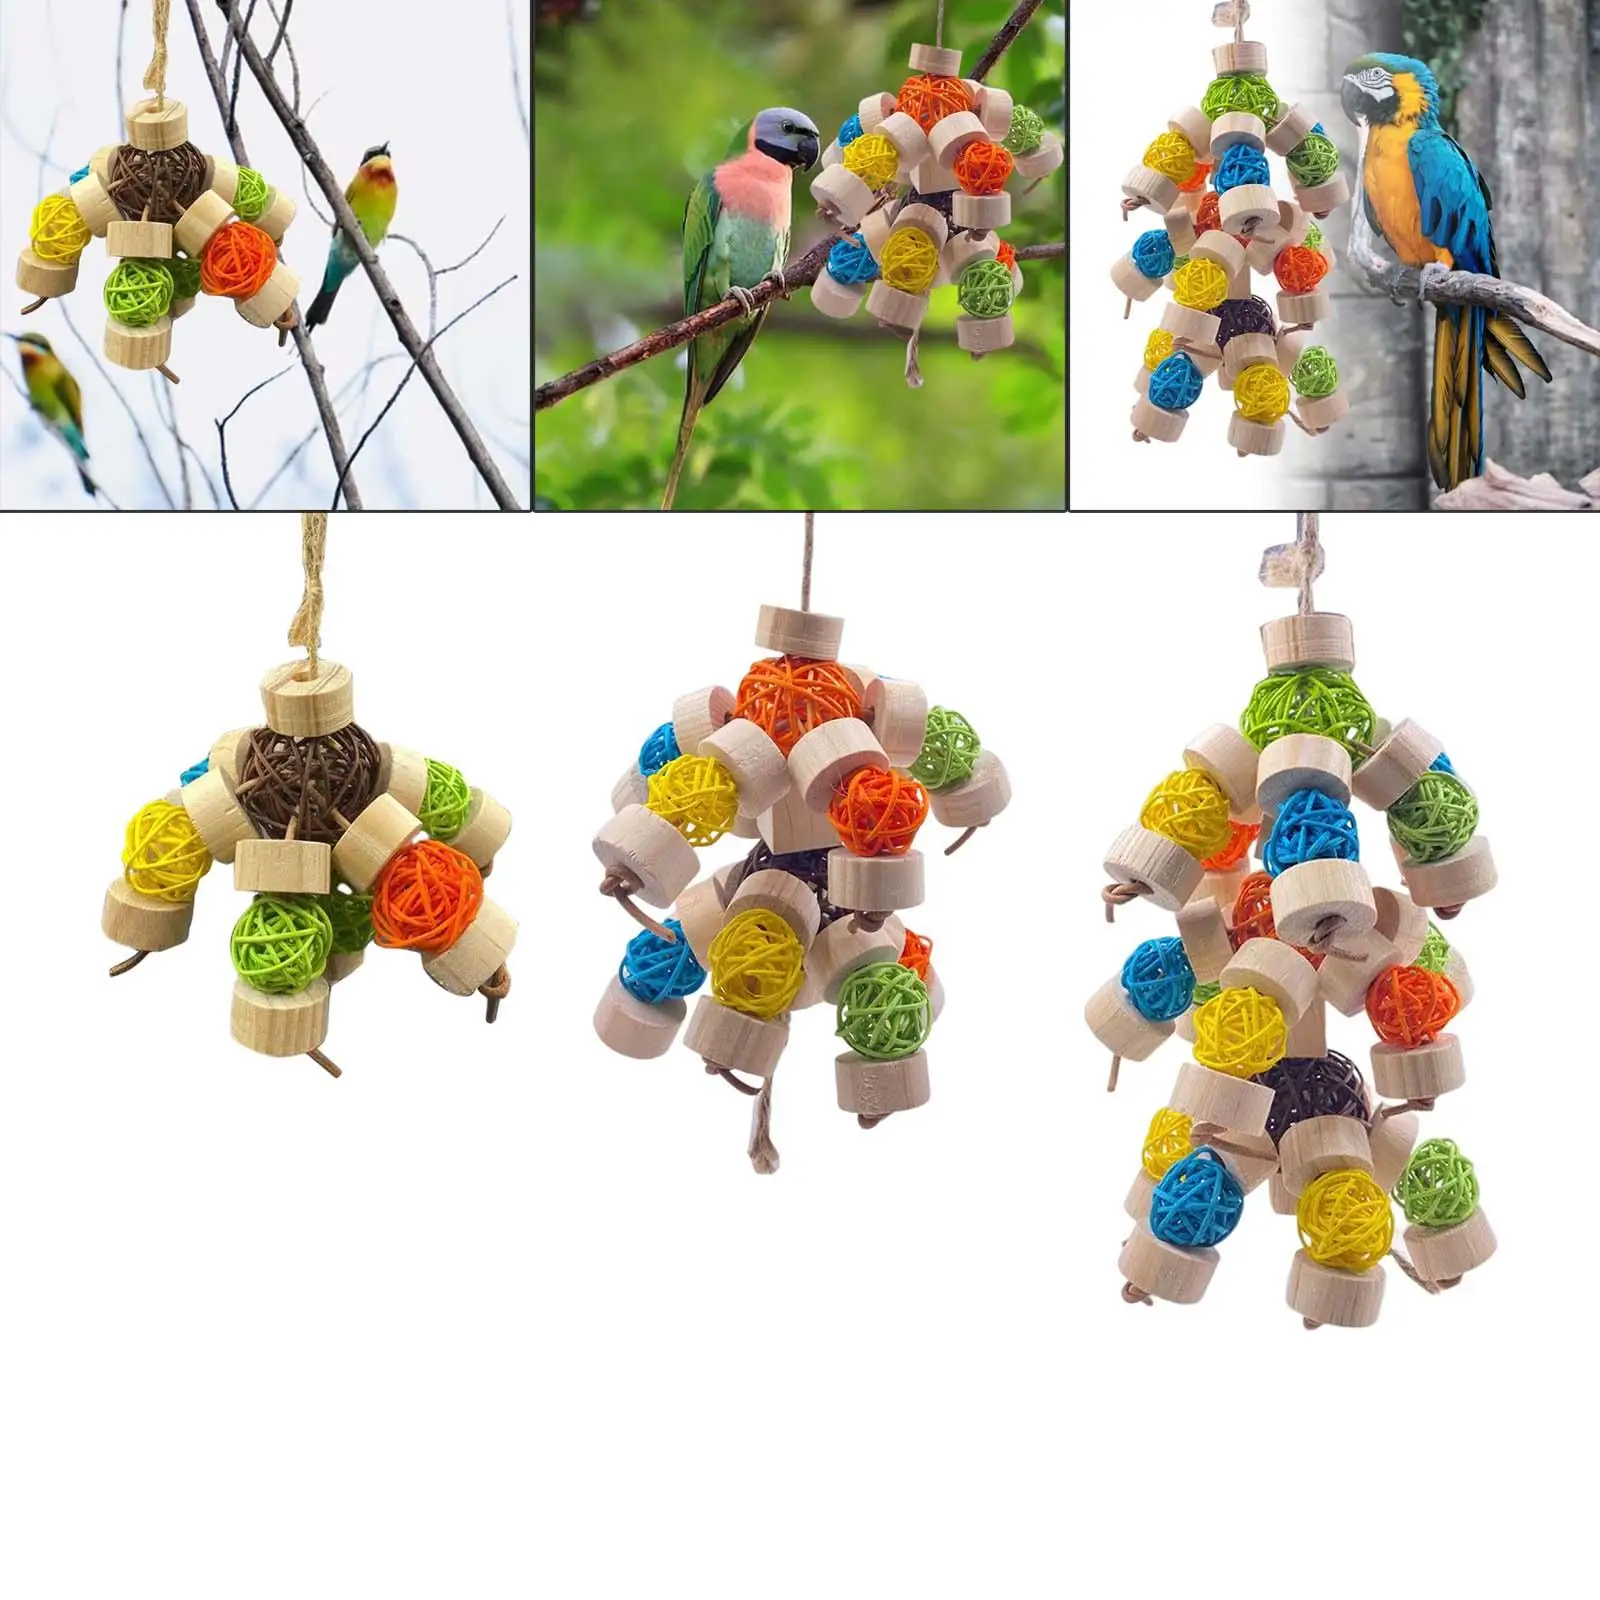 Multicolored Rattan Balls Bird Block Knots Tearing Toy Wood Hanging Natural Parrot Chewing Toy for Canary Gift Entertainment